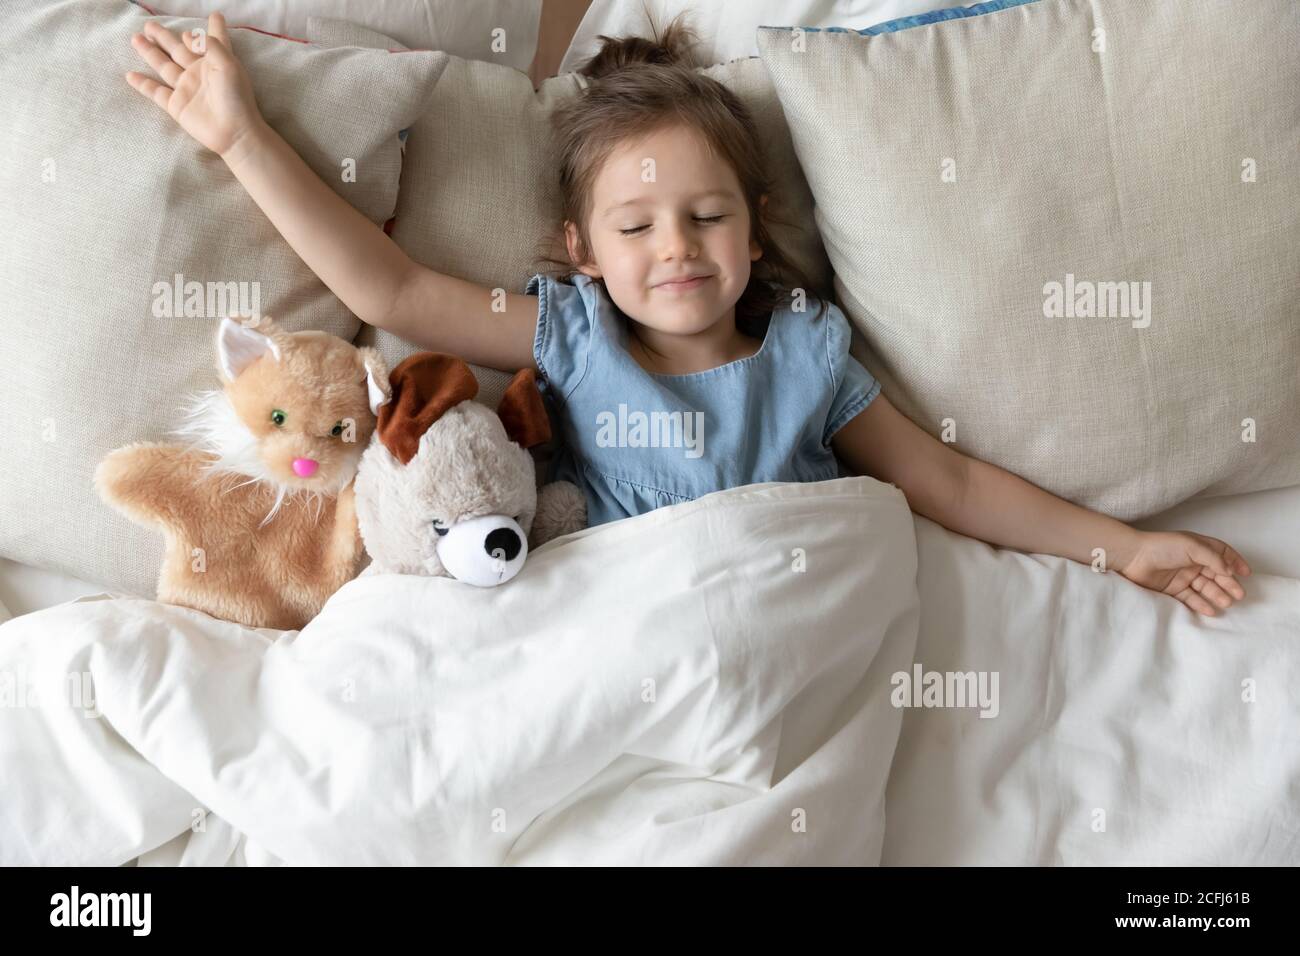 Little girl sleeping in bed with fluffy animal toys Stock Photo